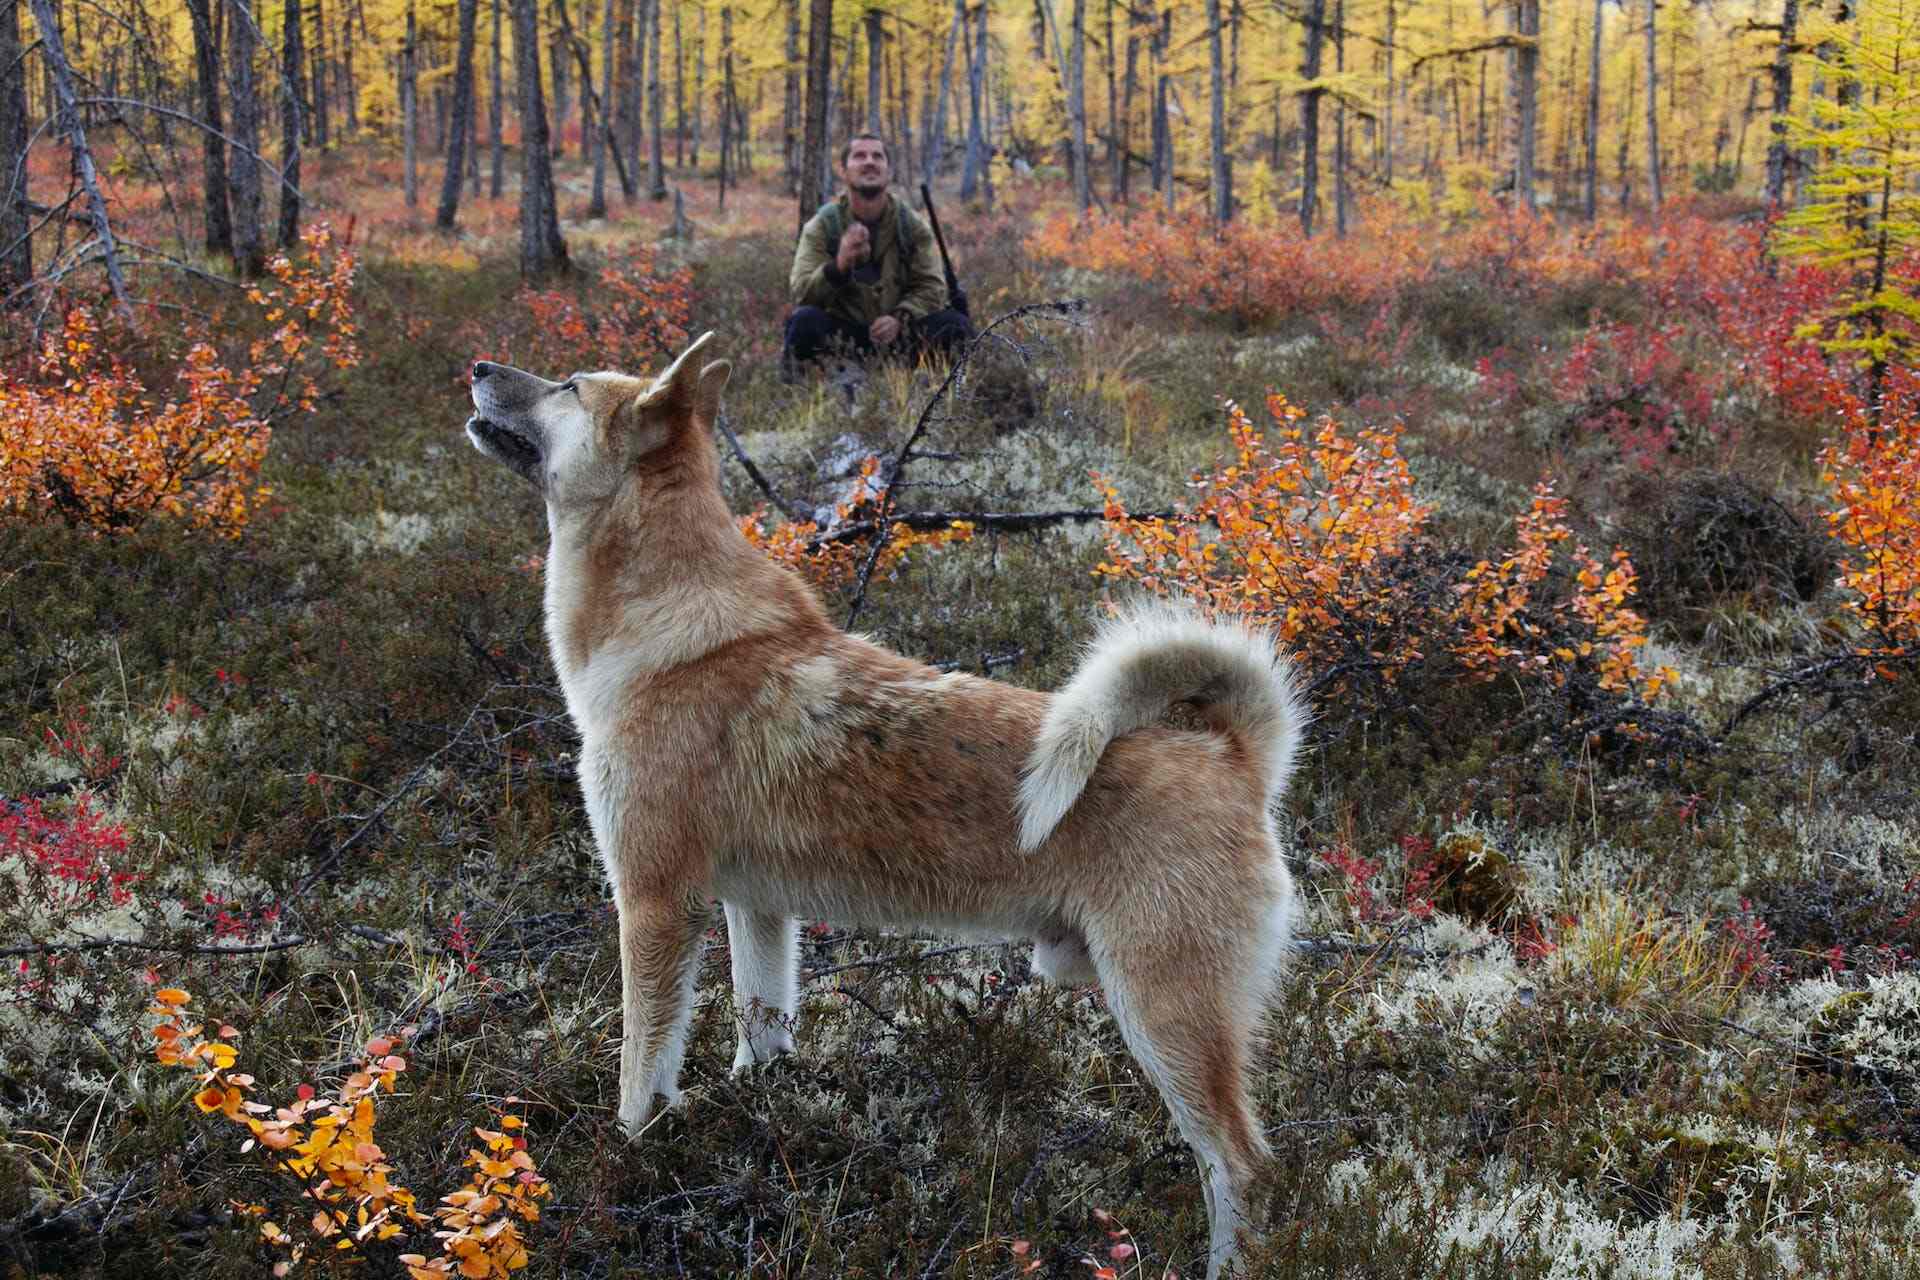 A man hunting with his dog in an autumn forest